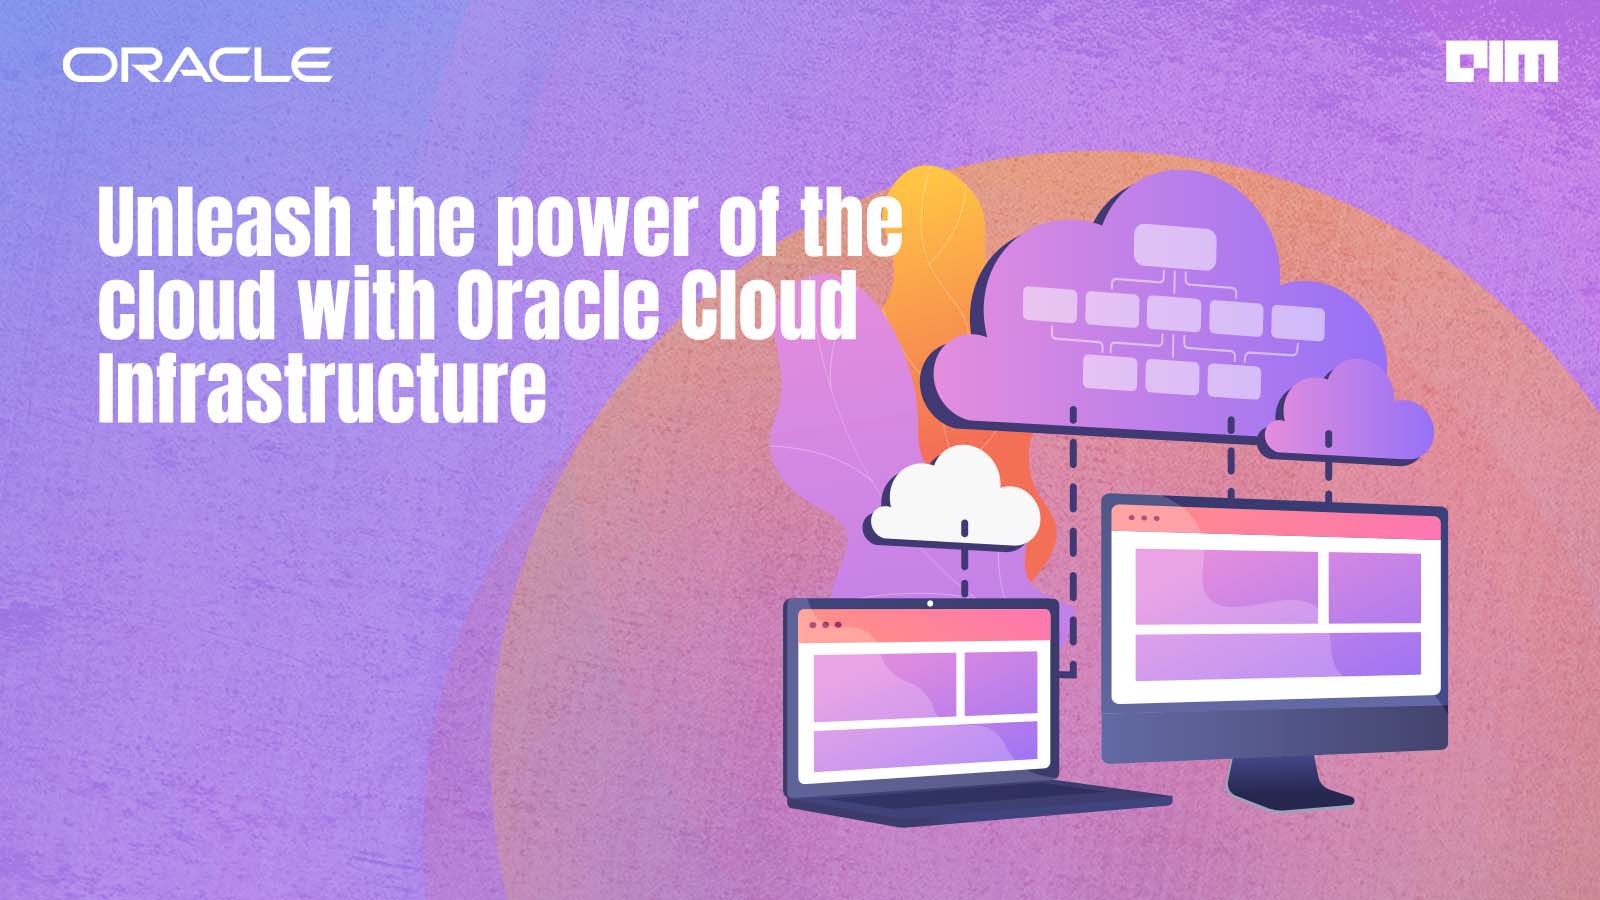 Unleash the power of the cloud with Oracle Cloud Infrastructure